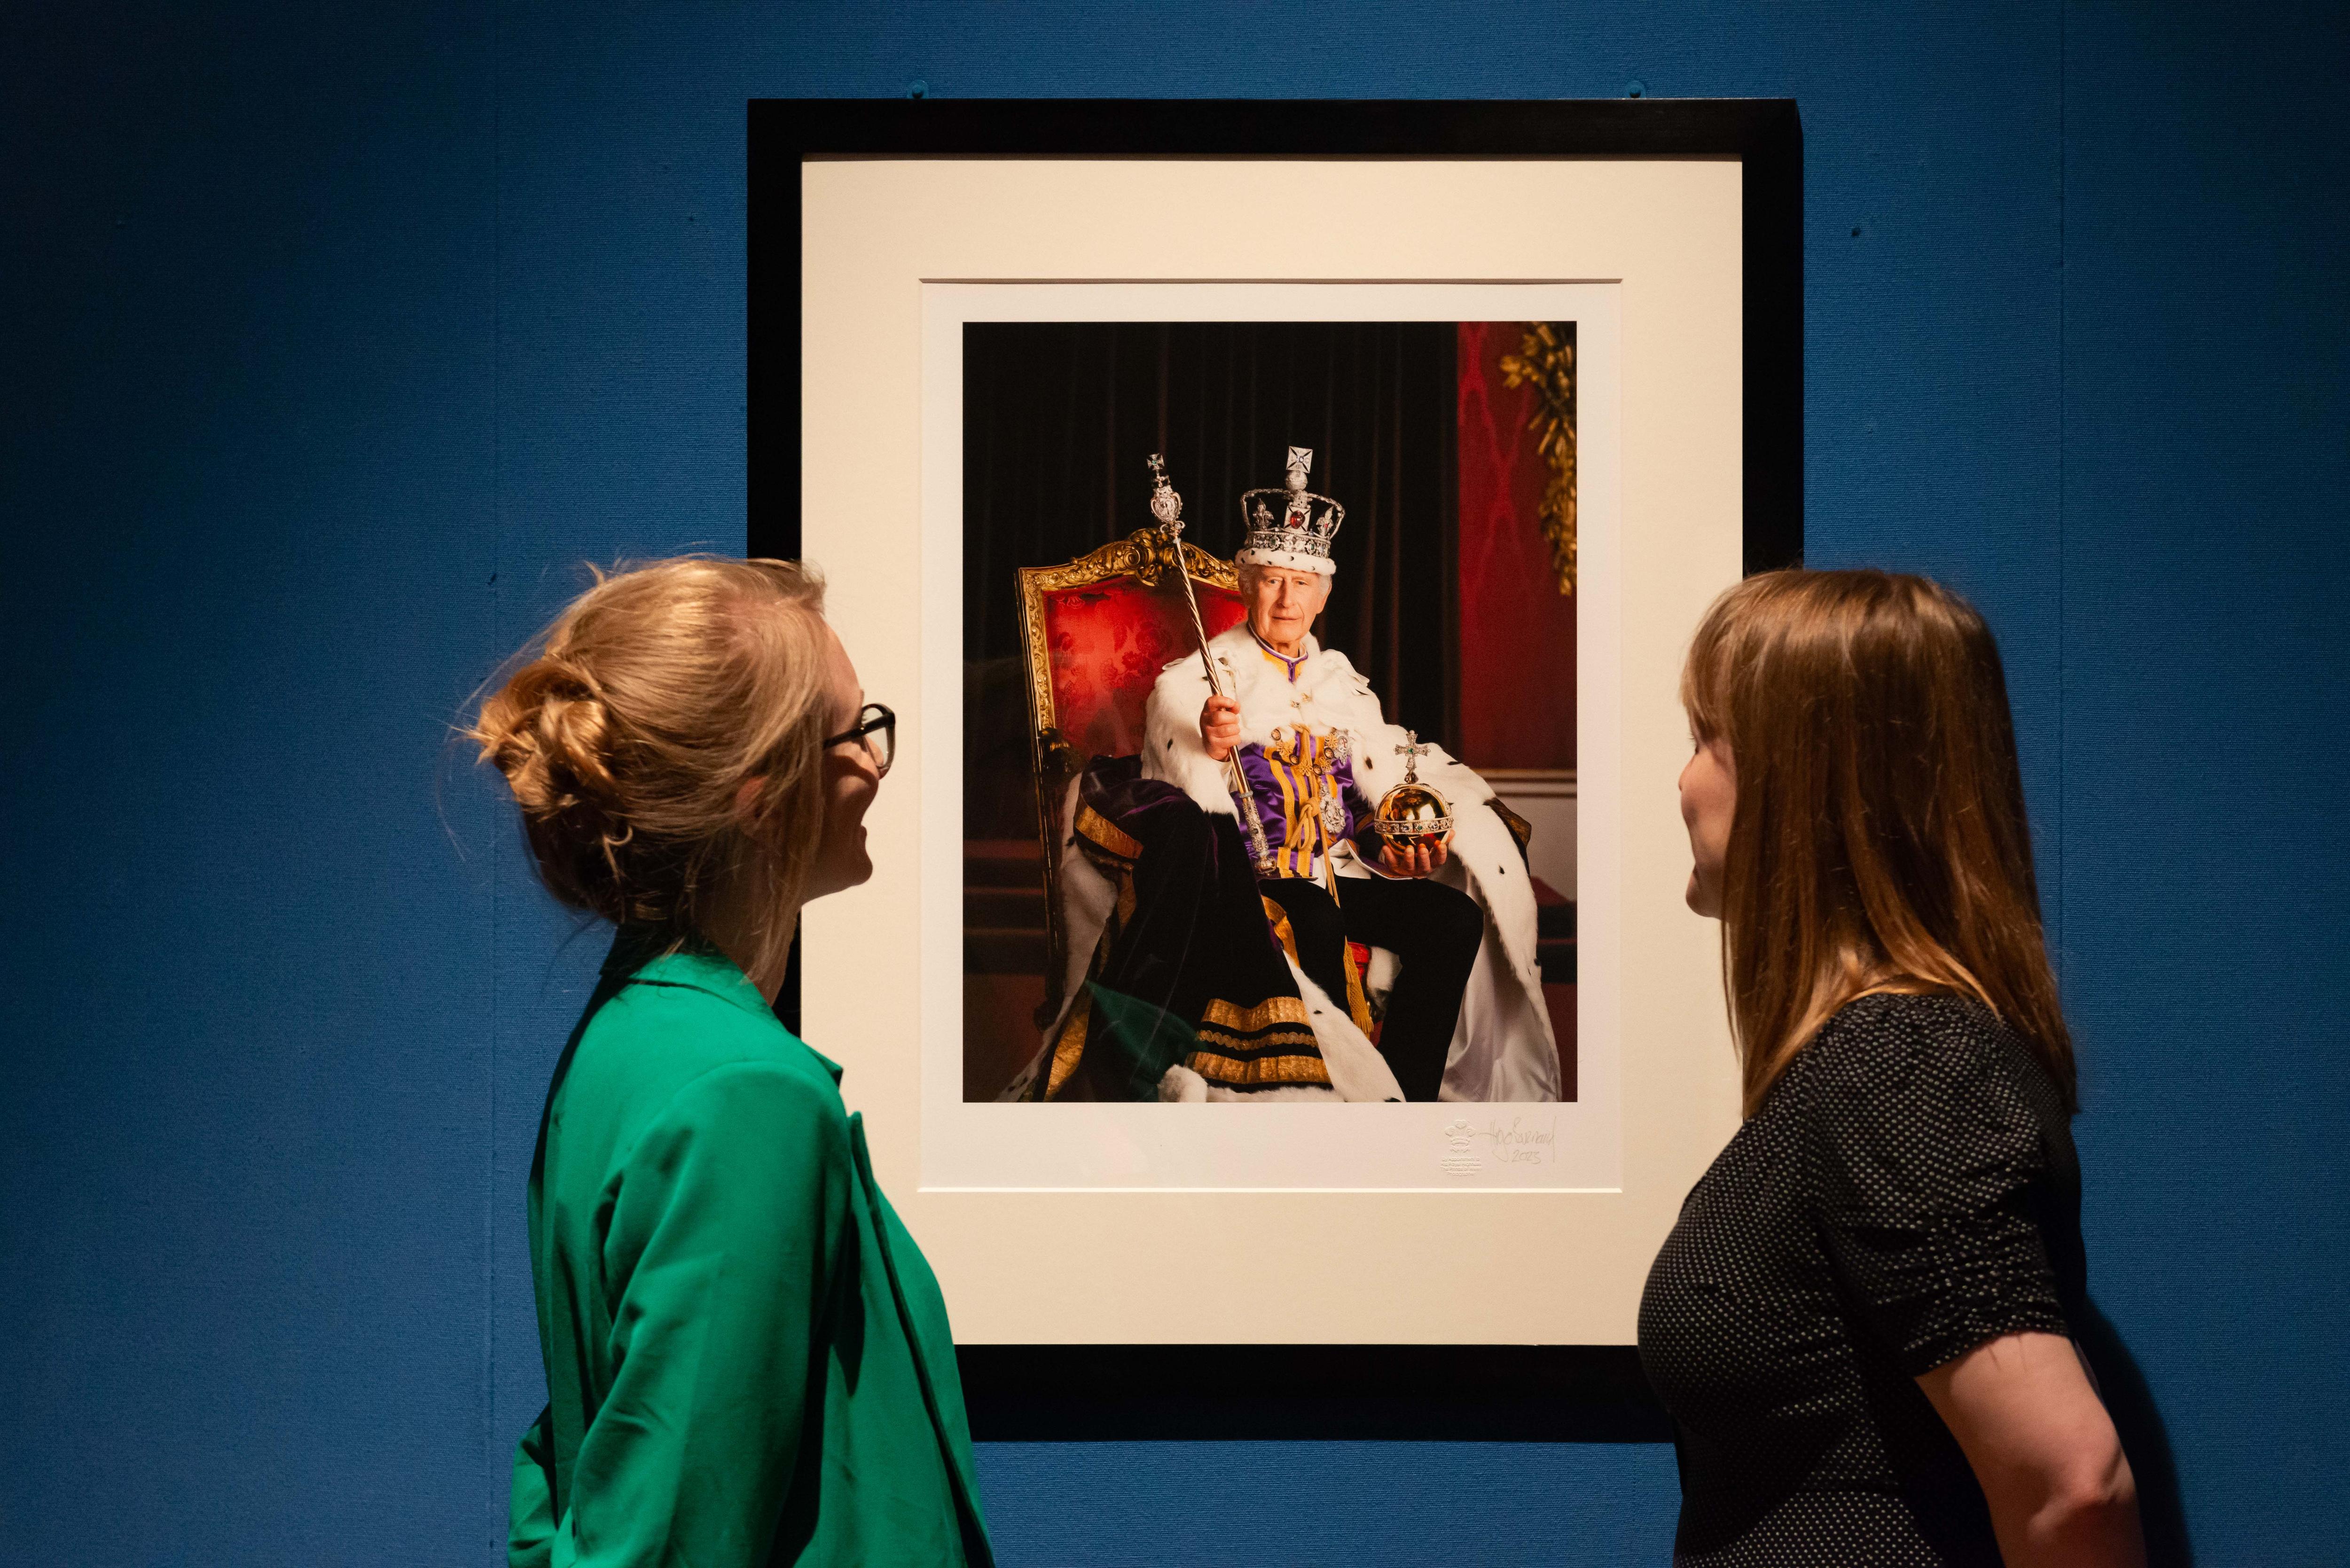 King Charles III's coronation photo hanging in the exhibition with two women looking at it